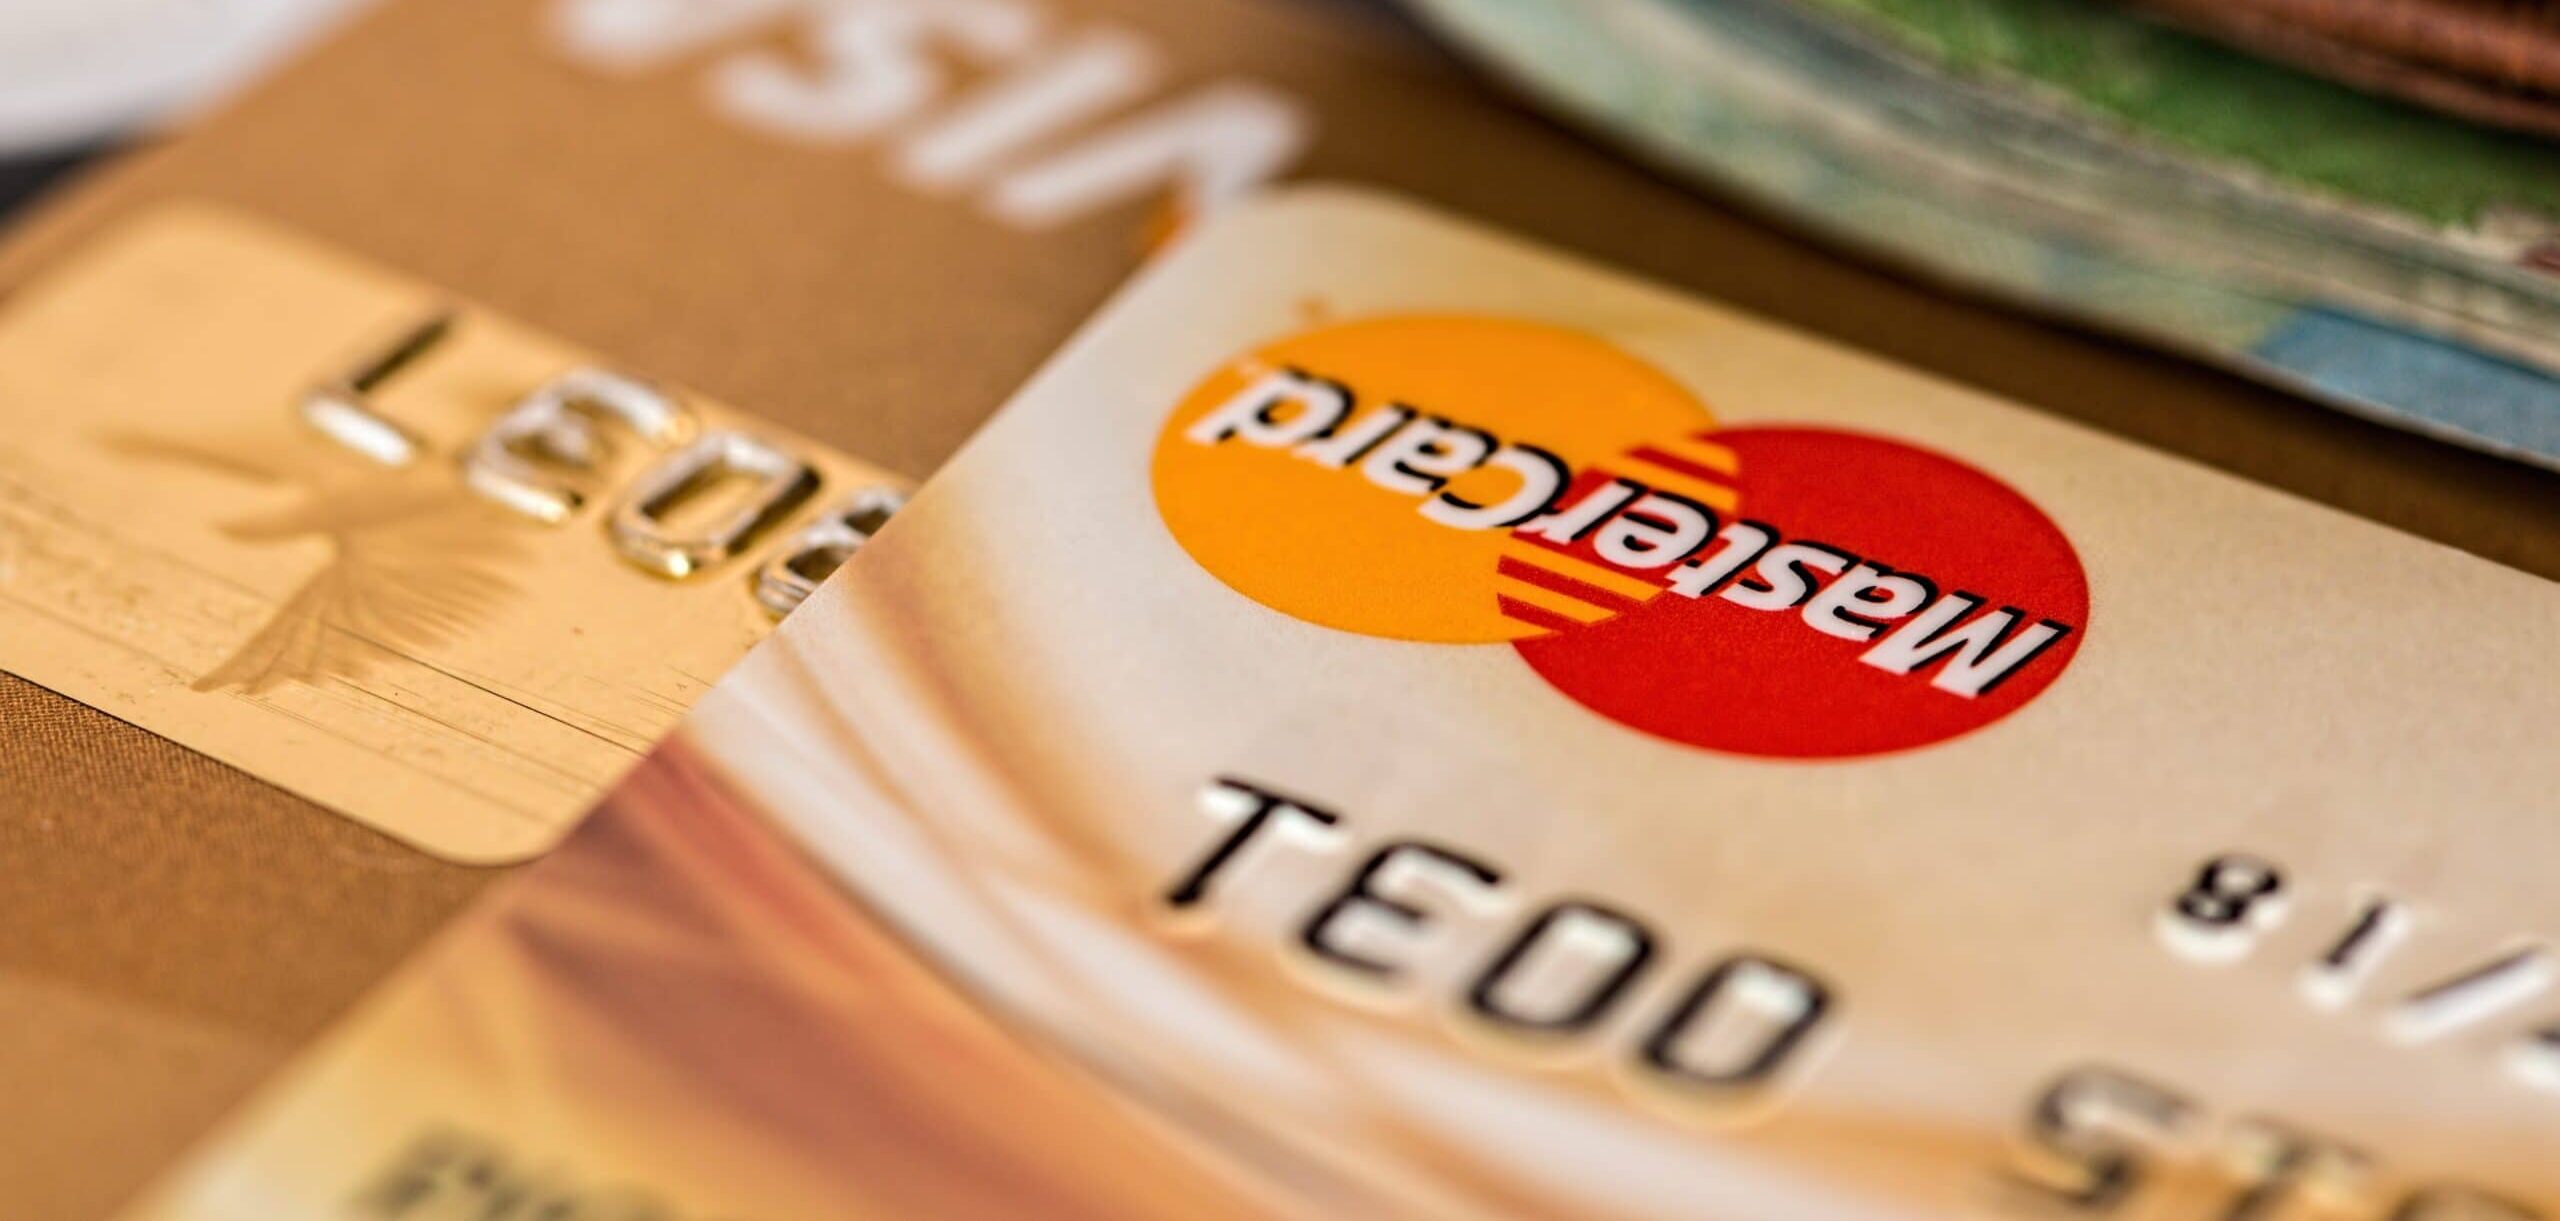 How To Change The Name On Your Credit Card